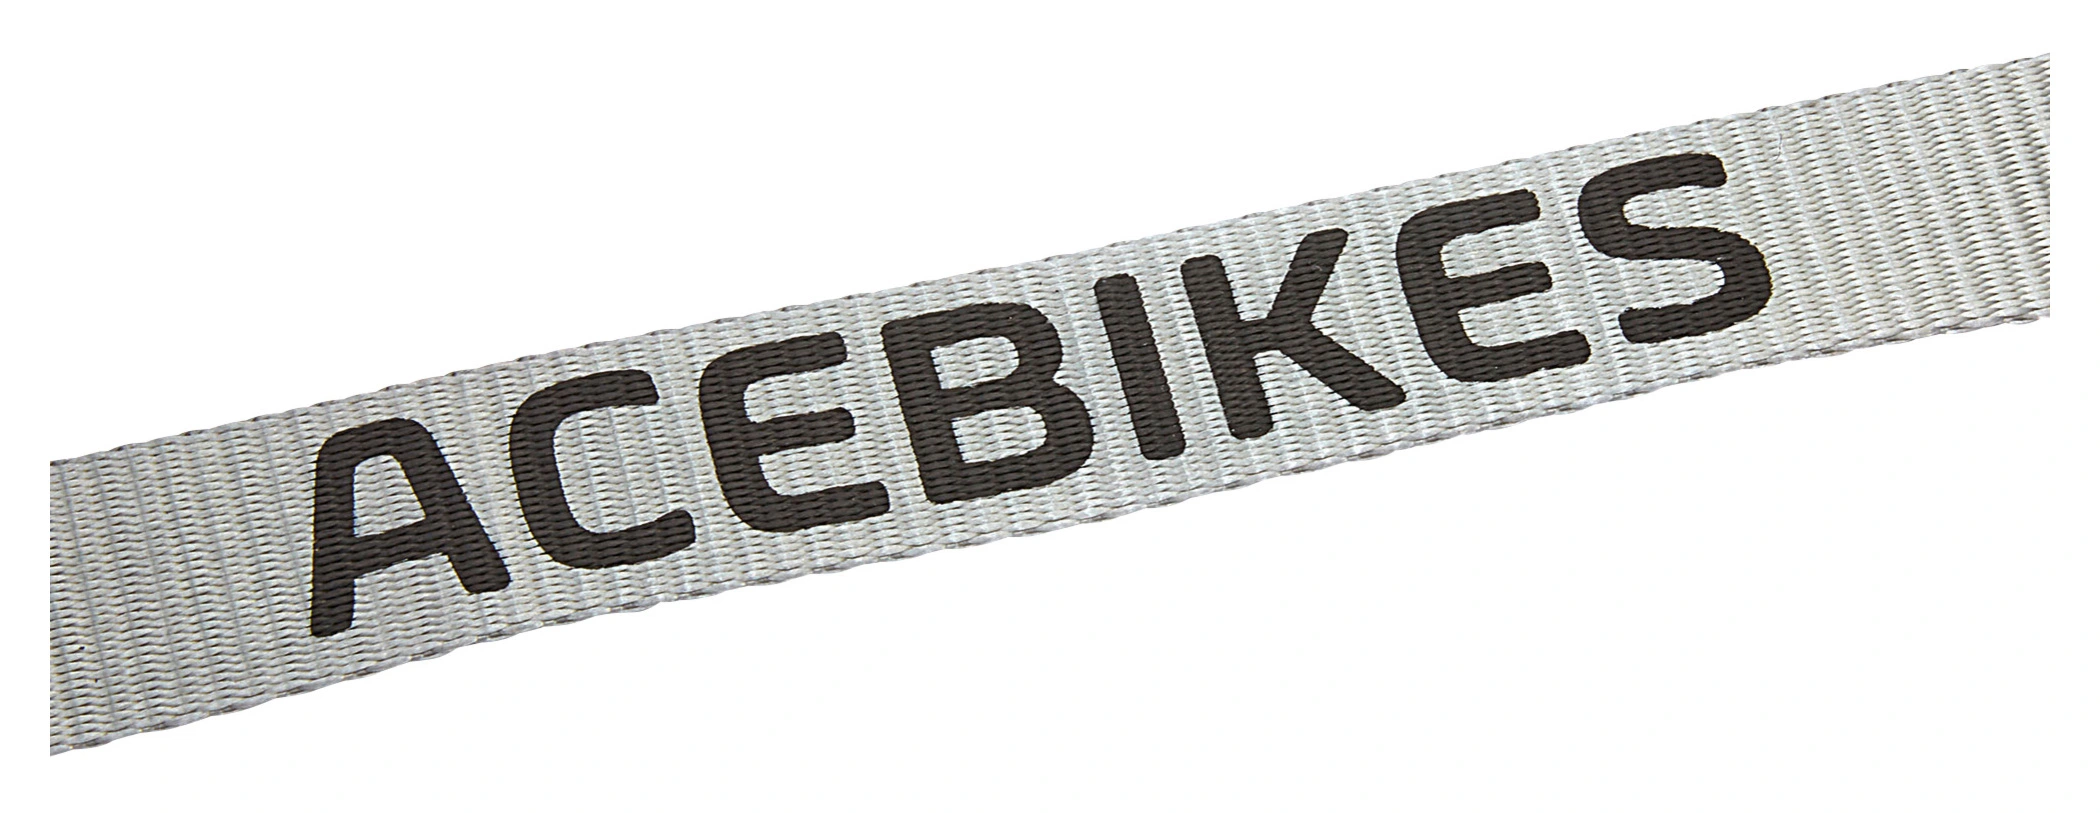 LOT ACEBIKES BUCKLE-UP+